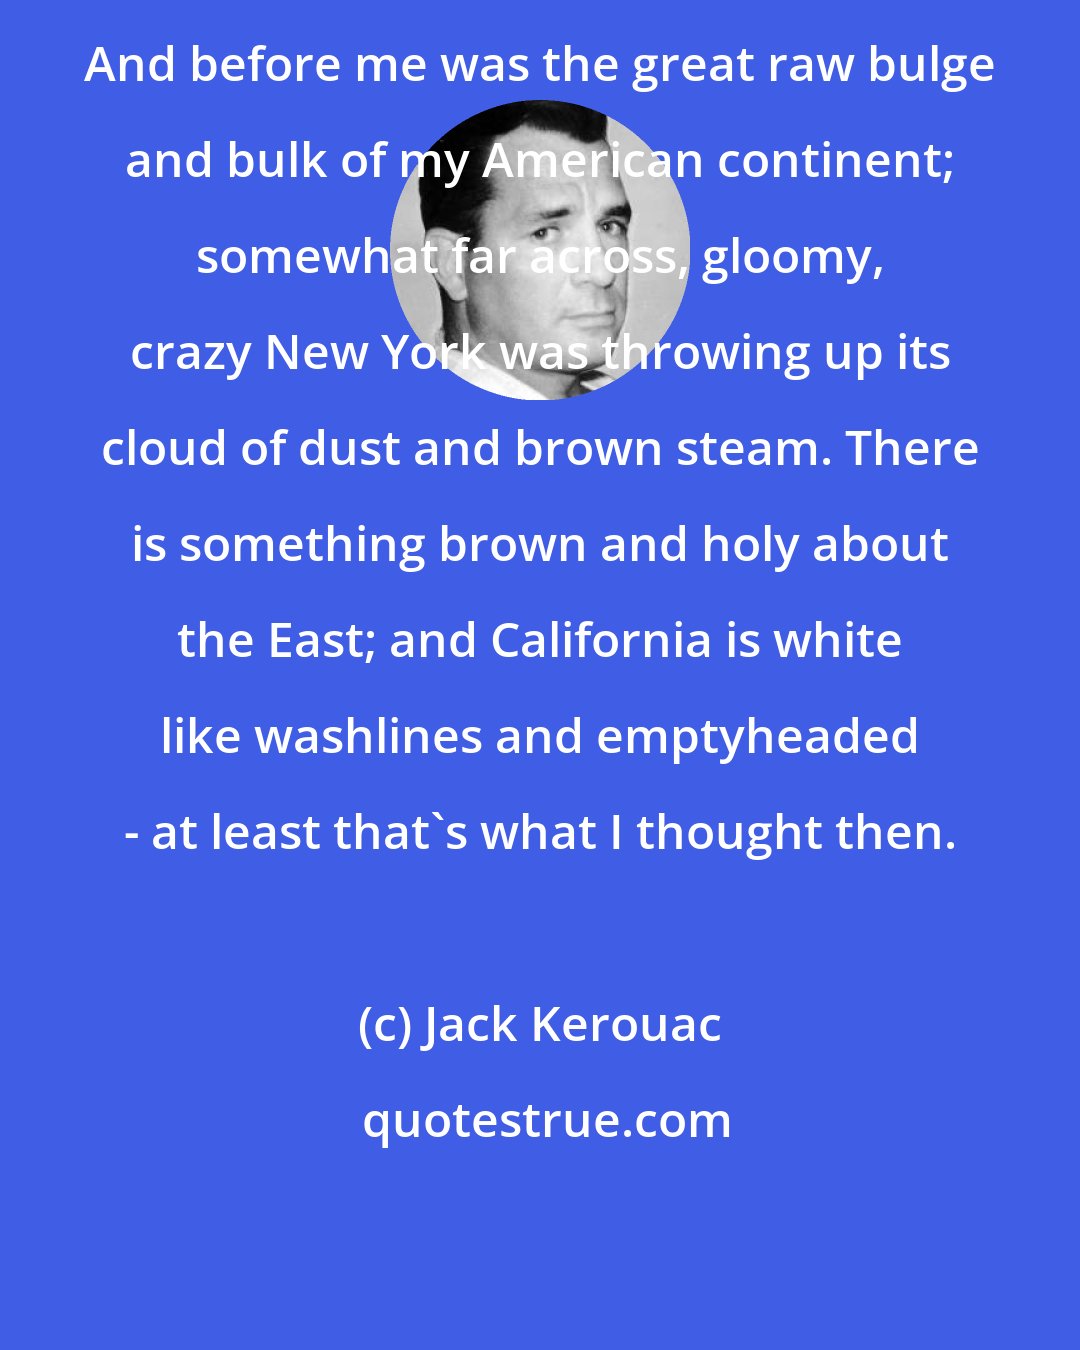 Jack Kerouac: And before me was the great raw bulge and bulk of my American continent; somewhat far across, gloomy, crazy New York was throwing up its cloud of dust and brown steam. There is something brown and holy about the East; and California is white like washlines and emptyheaded - at least that's what I thought then.